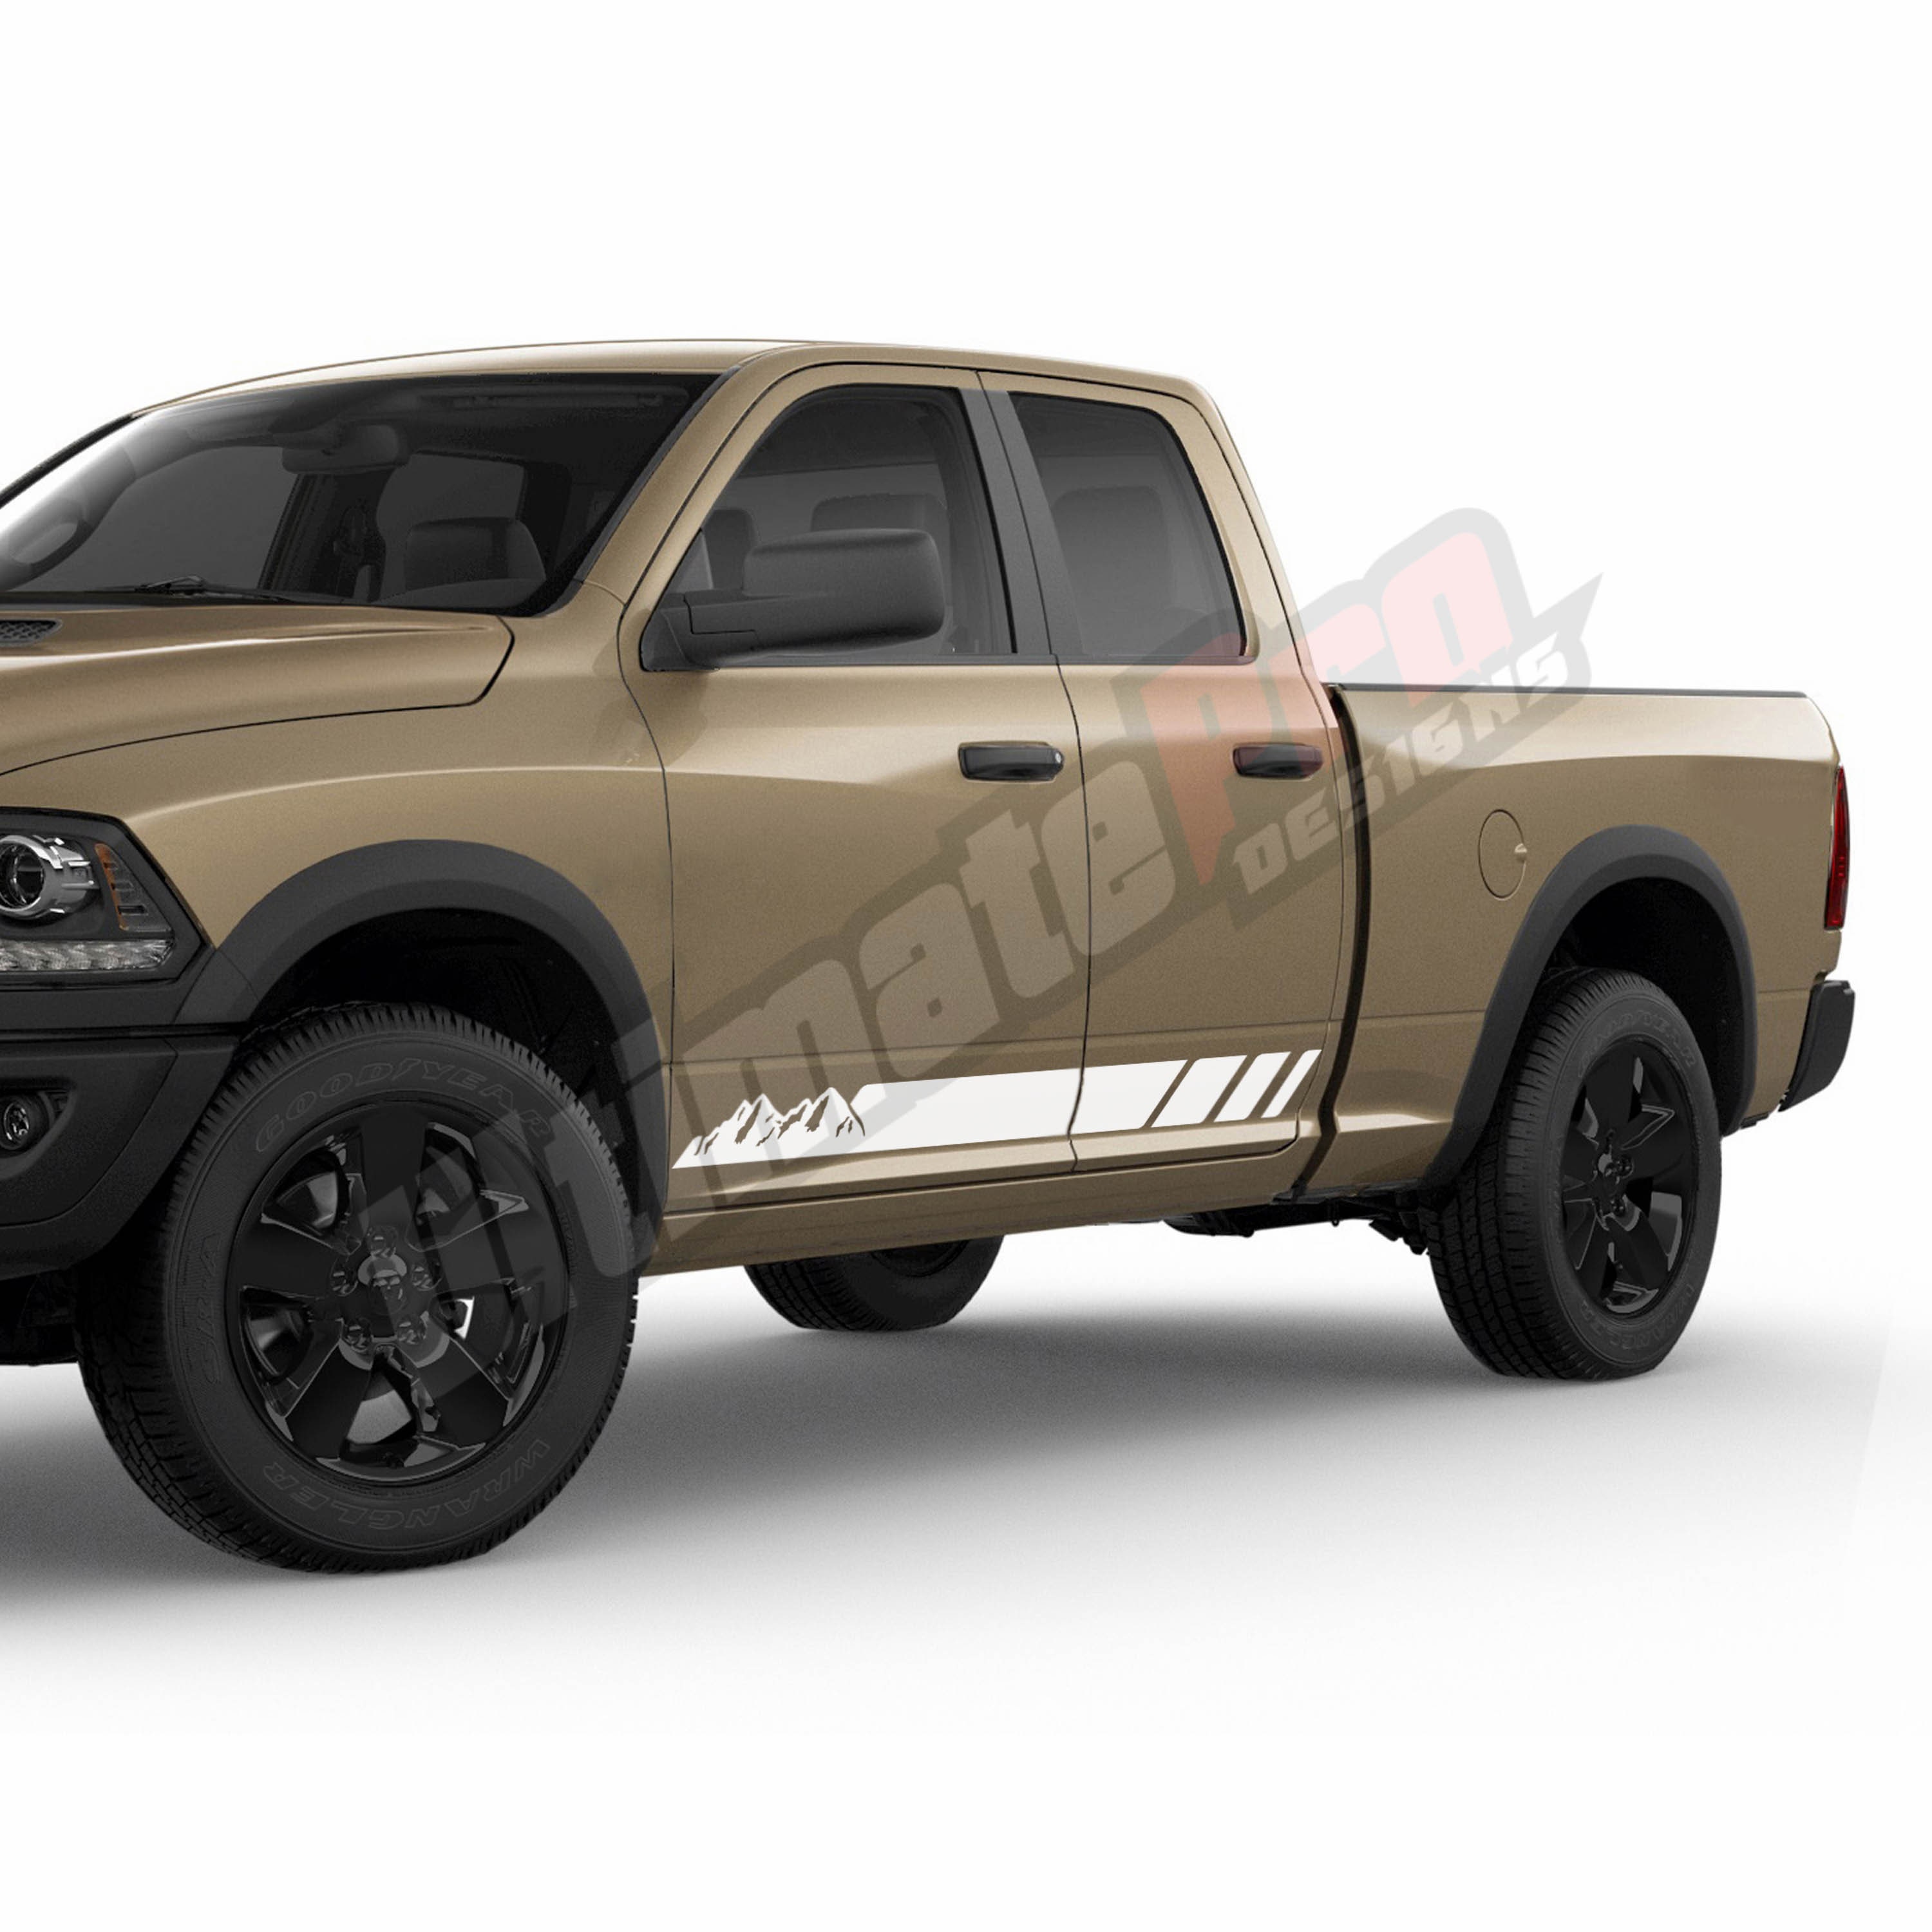 Decal Sticker Side Stripes Mountains Compatible With Dodge Ram Srt8 Rt 1500 Quad Cab Gen 3 4 5 2009 - 2020 4x4 Off Road